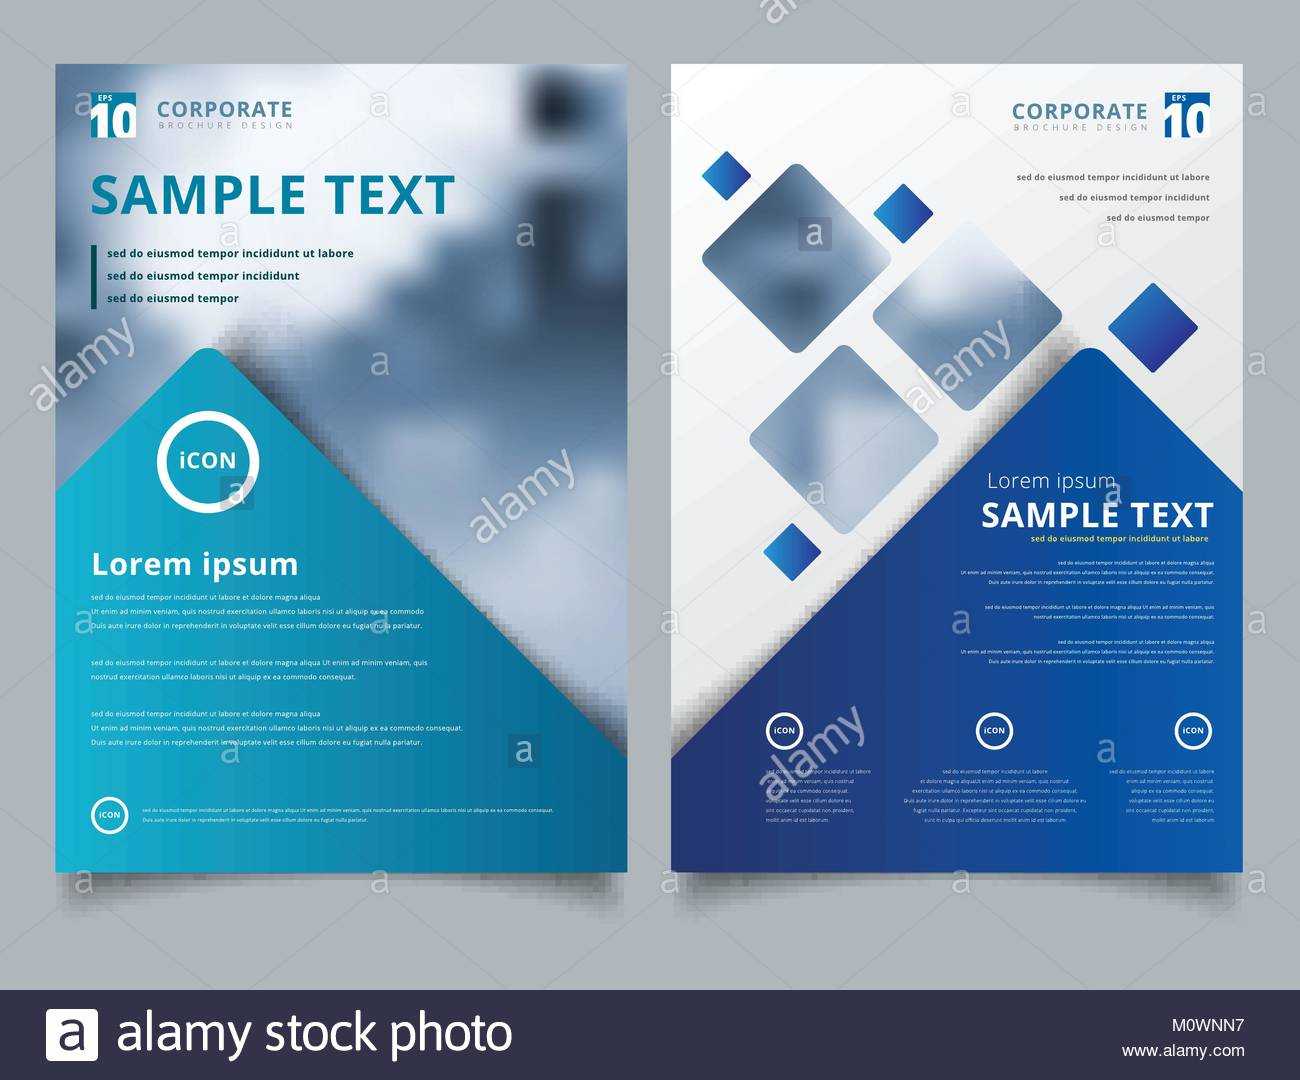 Free Poster Design Templates Illustrator With Scientific Within Illustrator Brochure Templates Free Download